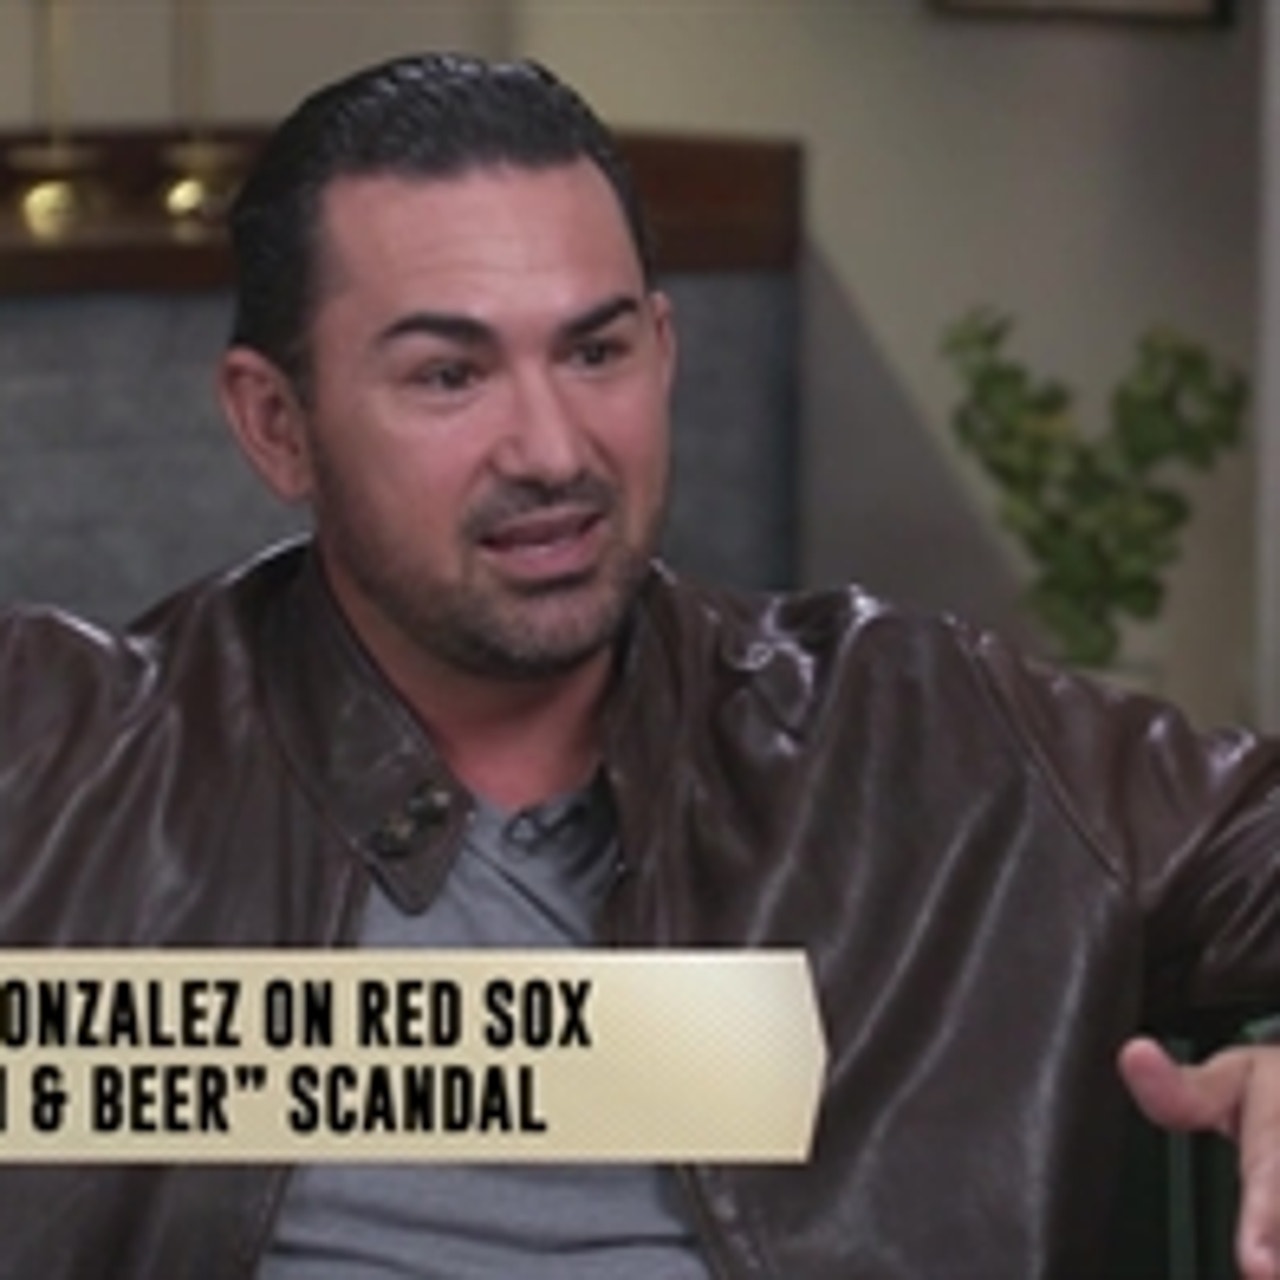 Adrian Gonzalez on Red Sox's Chicken and Beer Scandal